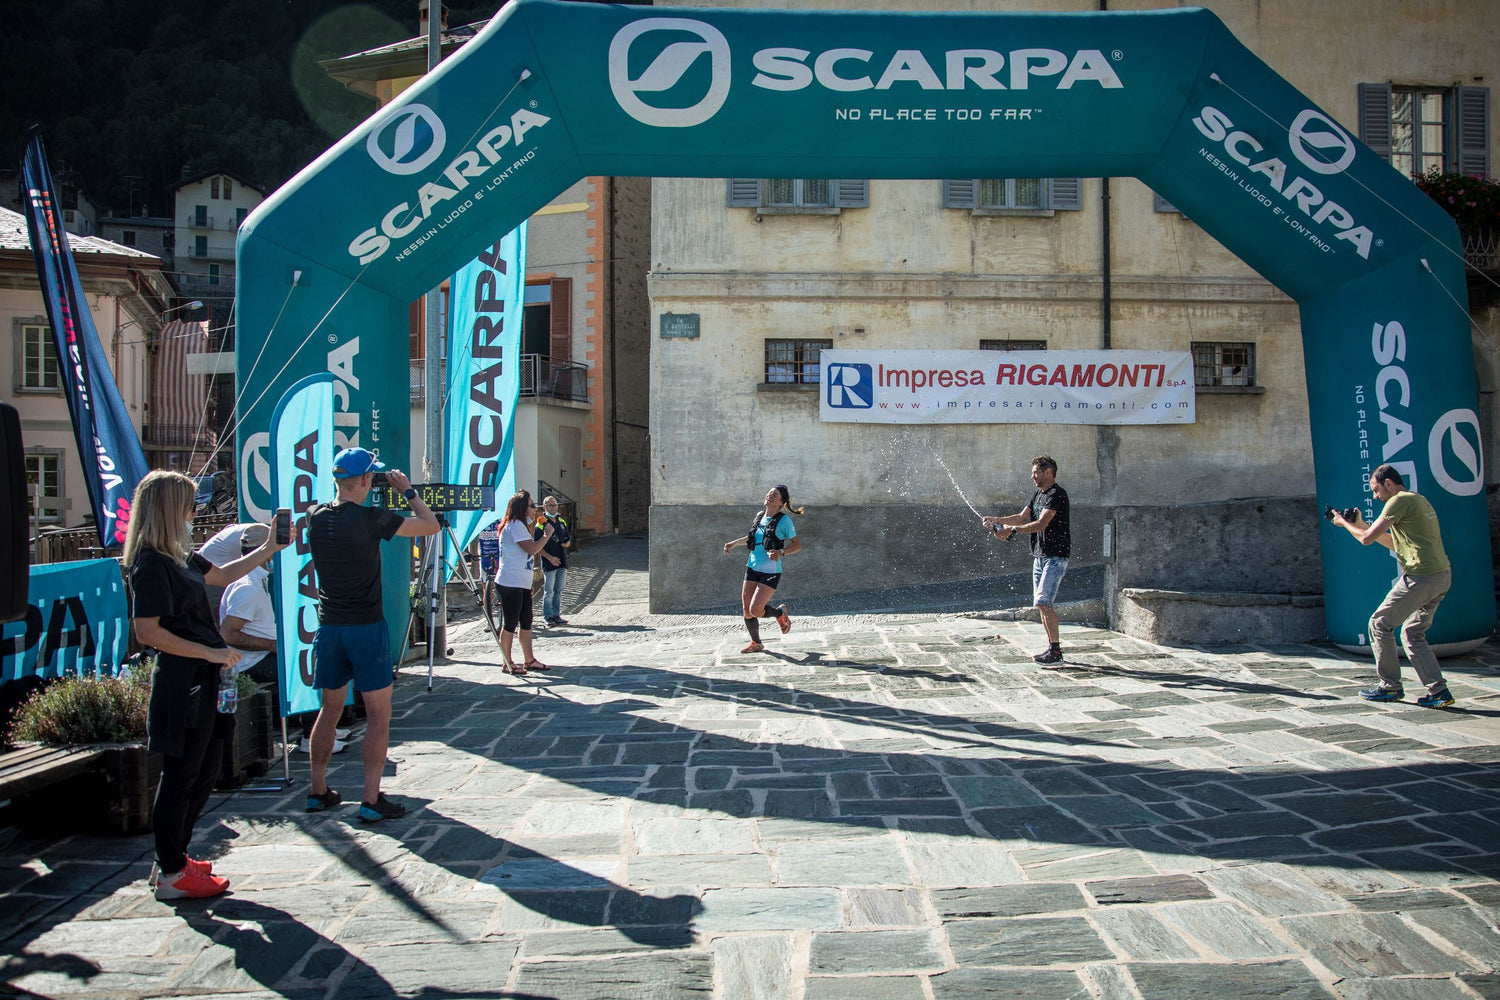 A closer look at Scarpa's trail running shoes